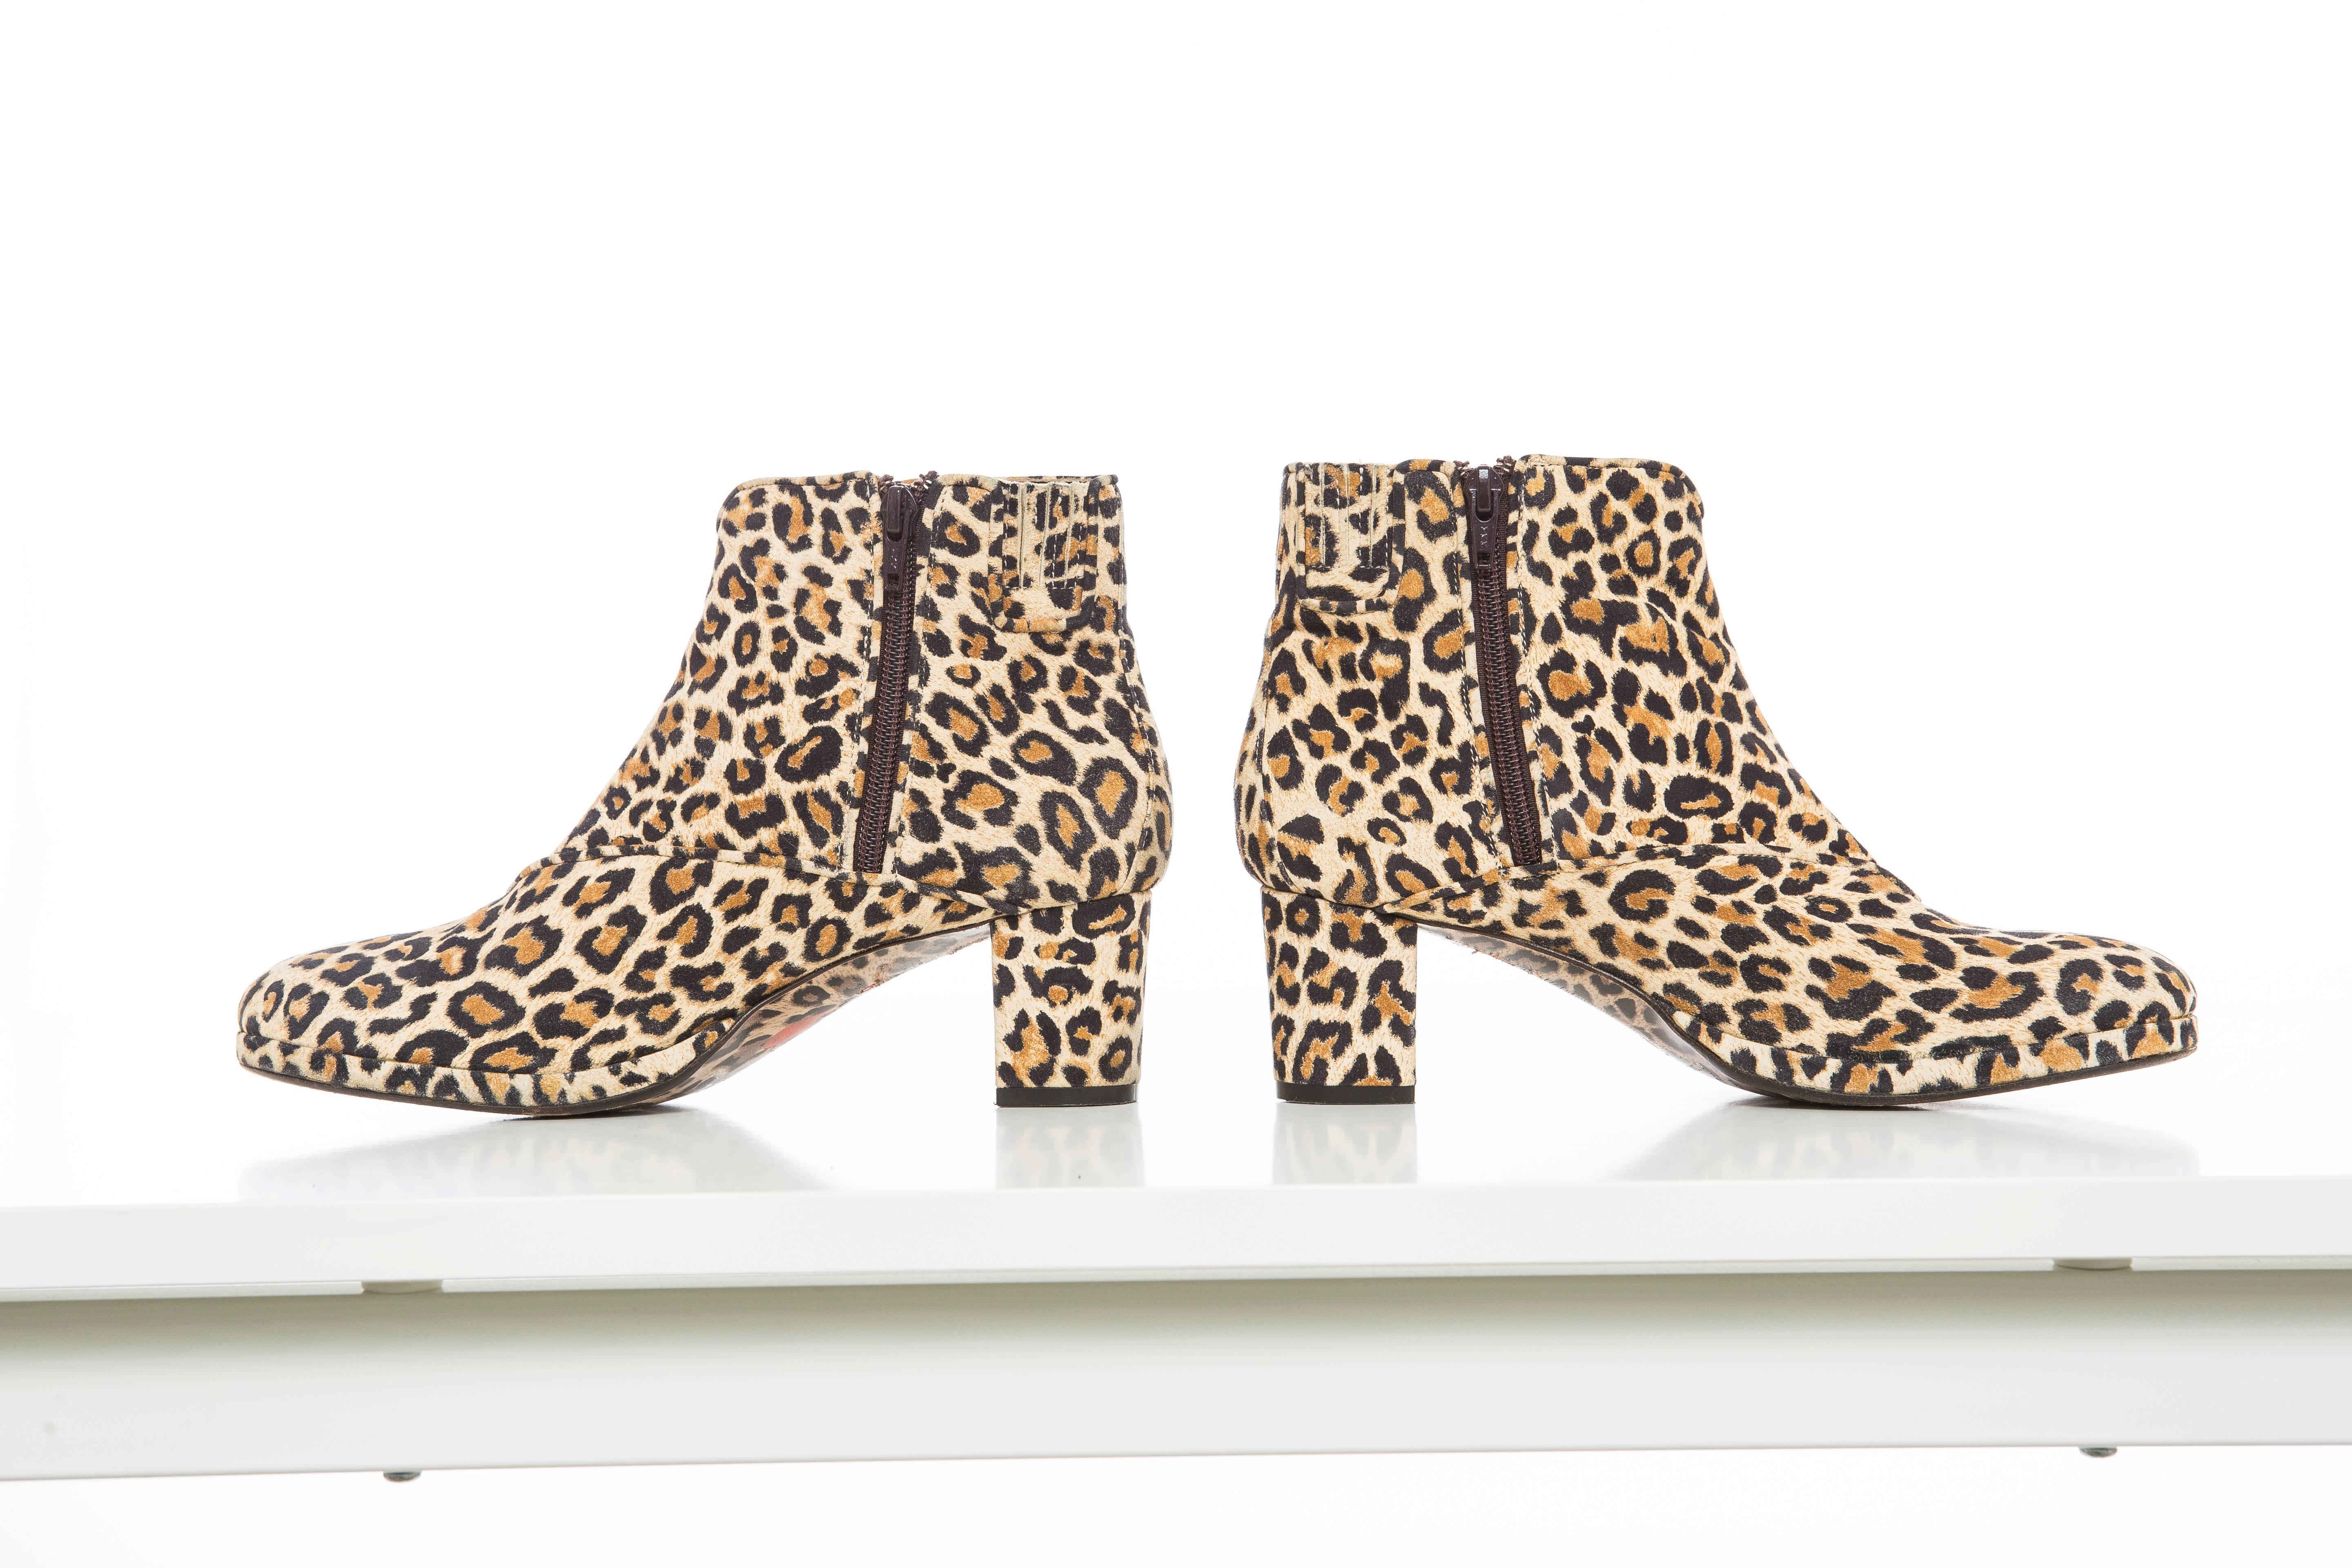 Warren Edwards Leopard Print Suede Ankle Boots In Excellent Condition For Sale In Cincinnati, OH